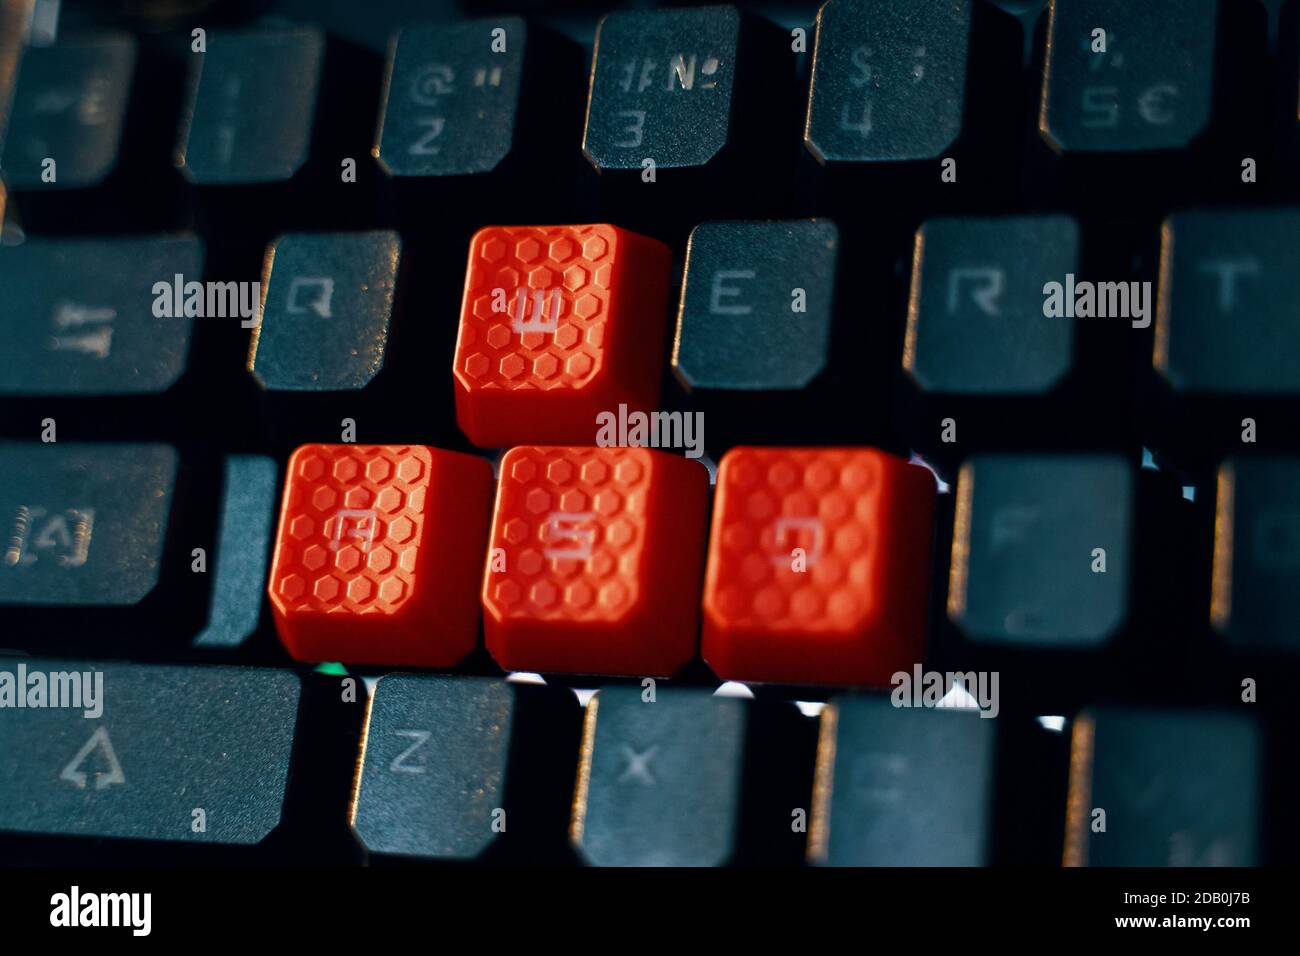 Gaming Keyboard. WASD keys are used in many video games. Multifunction Keyboard with Set of Red Keys.  Stock Photo